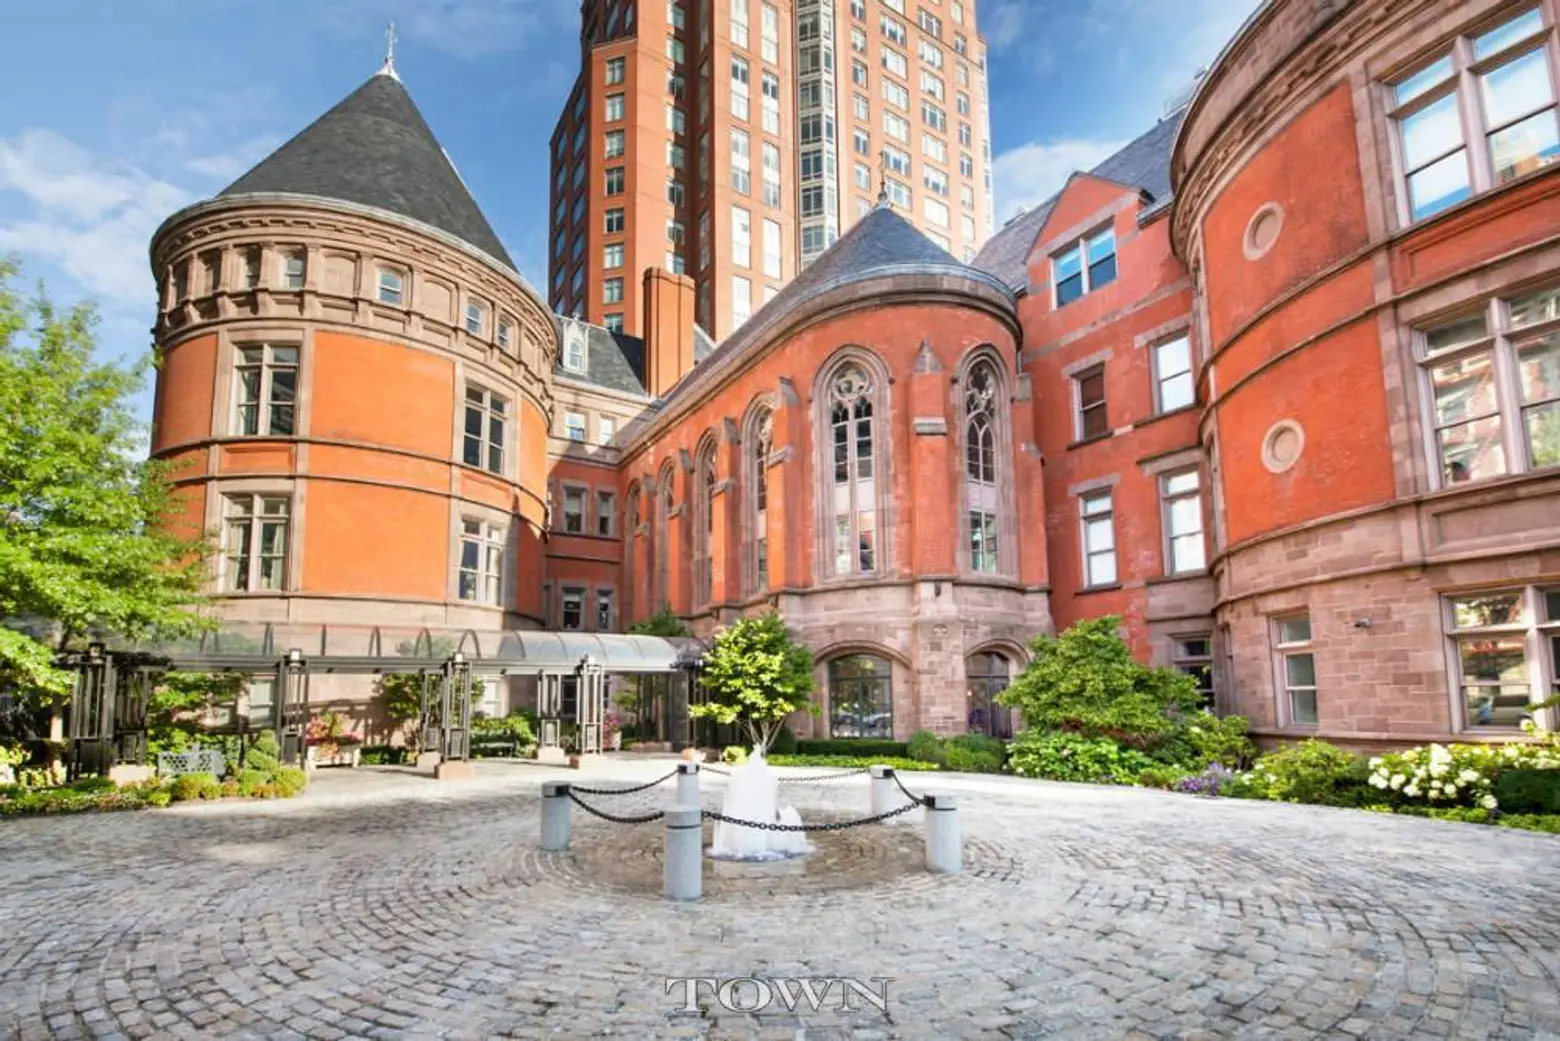 Live in a Landmarked Fairytale Castle With Round Rooms and a Storied Past for $10M